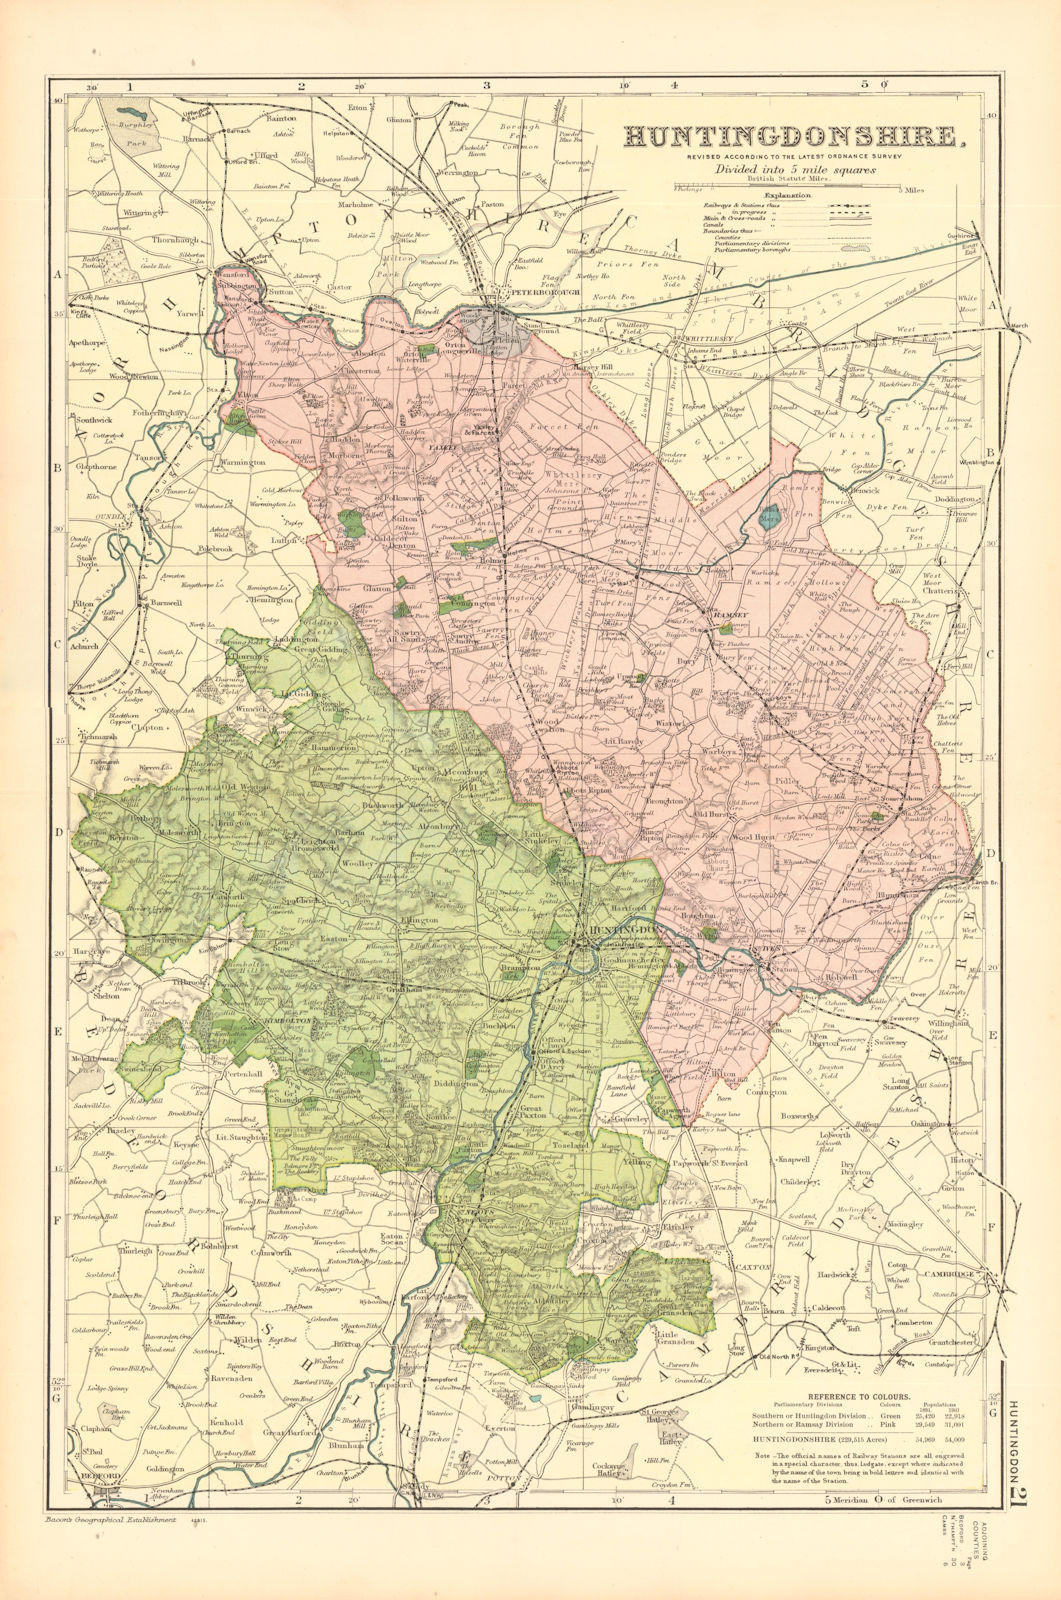 HUNTINGDONSHIRE. Showing Parliamentary divisions,boroughs & parks.BACON 1904 map